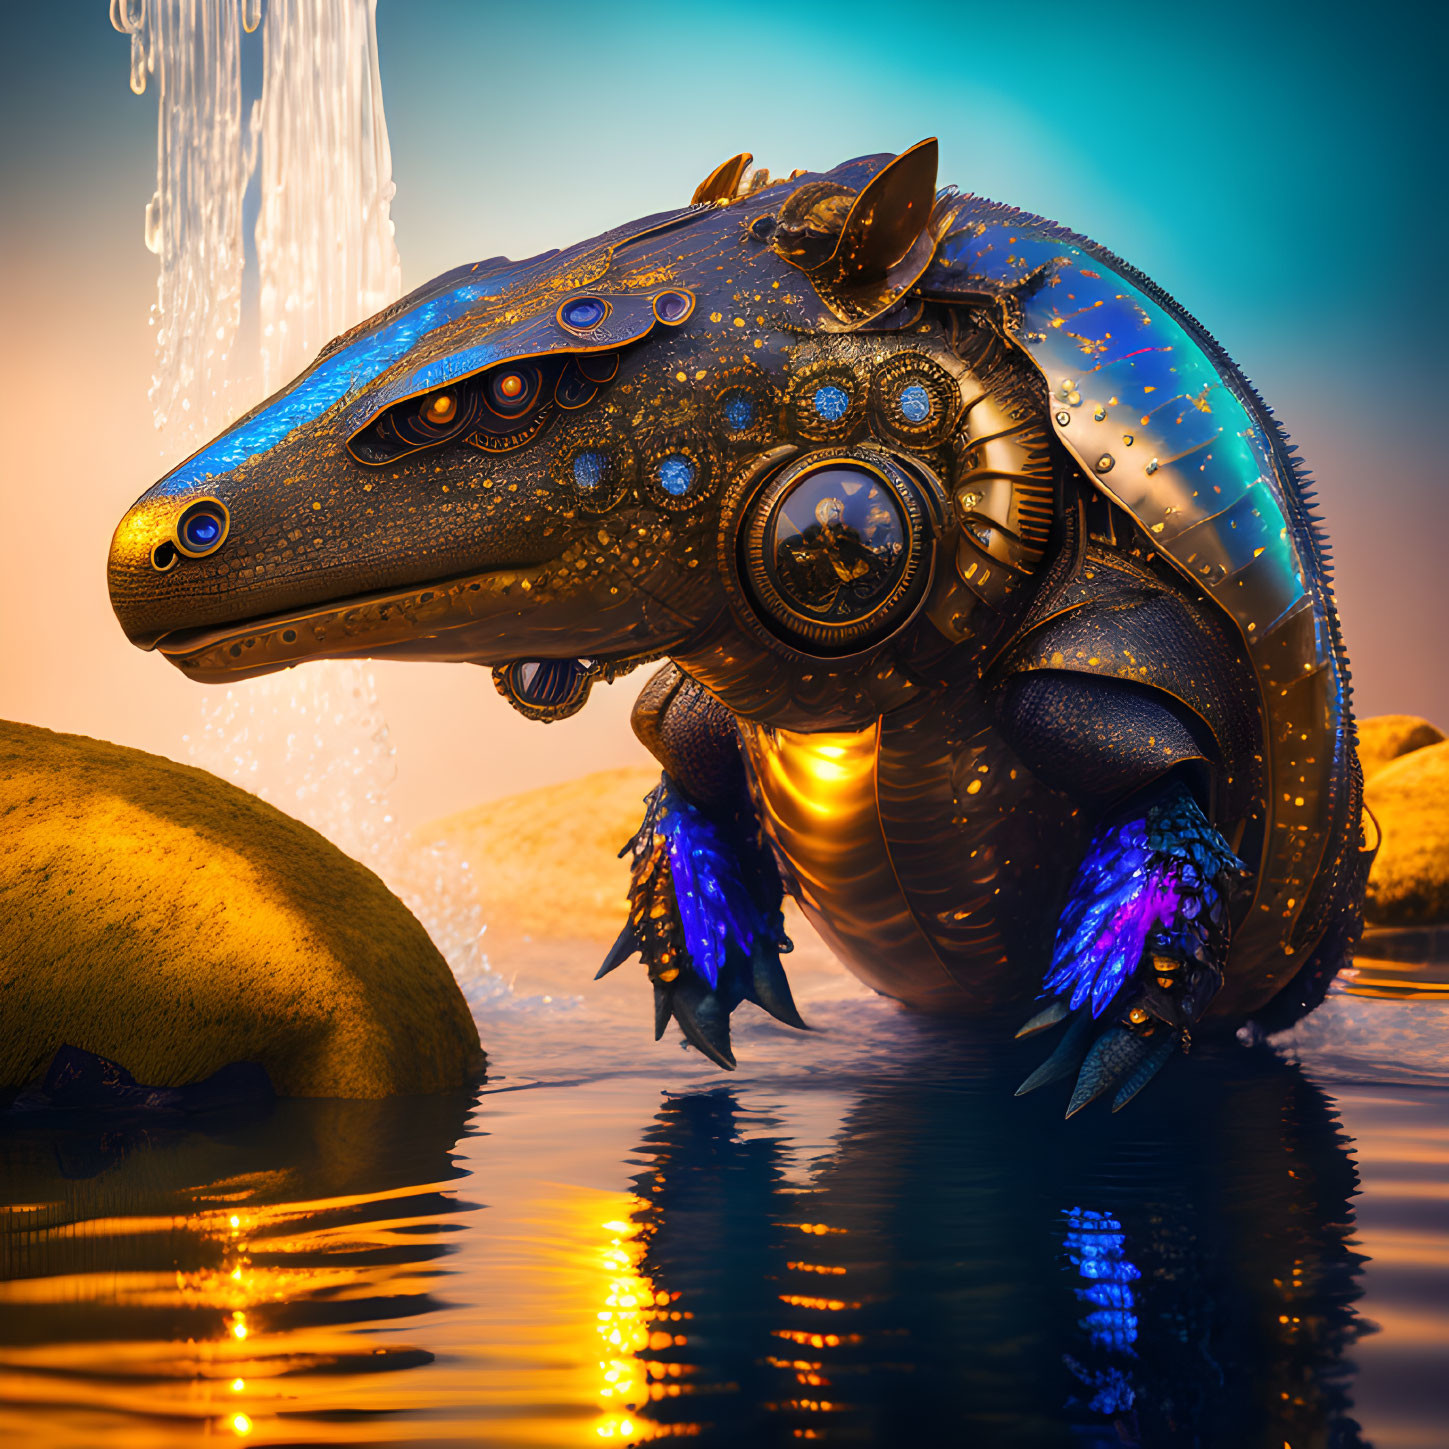 Intricate Mechanical Lizard with Blue Glowing Elements by Waterfall at Twilight